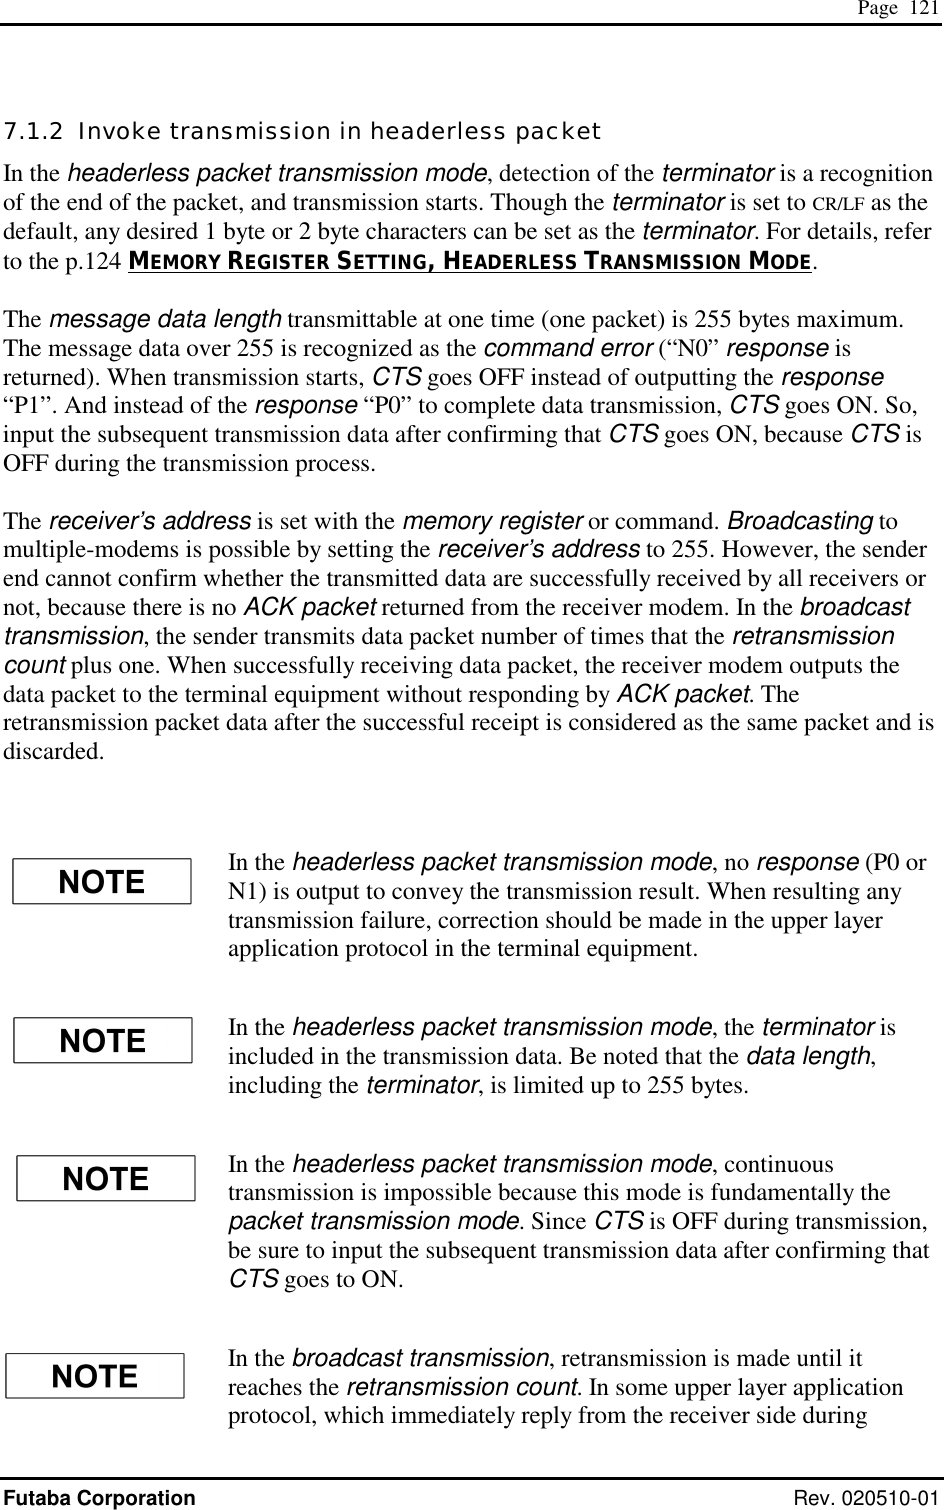  Page  121 Futaba Corporation Rev. 020510-01 7.1.2  Invoke transmission in headerless packet  In the headerless packet transmission mode, detection of the terminator is a recognition of the end of the packet, and transmission starts. Though the terminator is set to CR/LF as the default, any desired 1 byte or 2 byte characters can be set as the terminator. For details, refer to the p.124 MEMORY REGISTER SETTING, HEADERLESS TRANSMISSION MODE.  The message data length transmittable at one time (one packet) is 255 bytes maximum. The message data over 255 is recognized as the command error (“N0” response is returned). When transmission starts, CTS goes OFF instead of outputting the response “P1”. And instead of the response “P0” to complete data transmission, CTS goes ON. So, input the subsequent transmission data after confirming that CTS goes ON, because CTS is OFF during the transmission process.  The receiver’s address is set with the memory register or command. Broadcasting to multiple-modems is possible by setting the receiver’s address to 255. However, the sender end cannot confirm whether the transmitted data are successfully received by all receivers or not, because there is no ACK packet returned from the receiver modem. In the broadcast transmission, the sender transmits data packet number of times that the retransmission count plus one. When successfully receiving data packet, the receiver modem outputs the data packet to the terminal equipment without responding by ACK packet. The retransmission packet data after the successful receipt is considered as the same packet and is discarded.   In the headerless packet transmission mode, no response (P0 or N1) is output to convey the transmission result. When resulting any transmission failure, correction should be made in the upper layer application protocol in the terminal equipment. In the headerless packet transmission mode, the terminator is included in the transmission data. Be noted that the data length, including the terminator, is limited up to 255 bytes. In the headerless packet transmission mode, continuous transmission is impossible because this mode is fundamentally the packet transmission mode. Since CTS is OFF during transmission, be sure to input the subsequent transmission data after confirming that CTS goes to ON. In the broadcast transmission, retransmission is made until it reaches the retransmission count. In some upper layer application protocol, which immediately reply from the receiver side during 